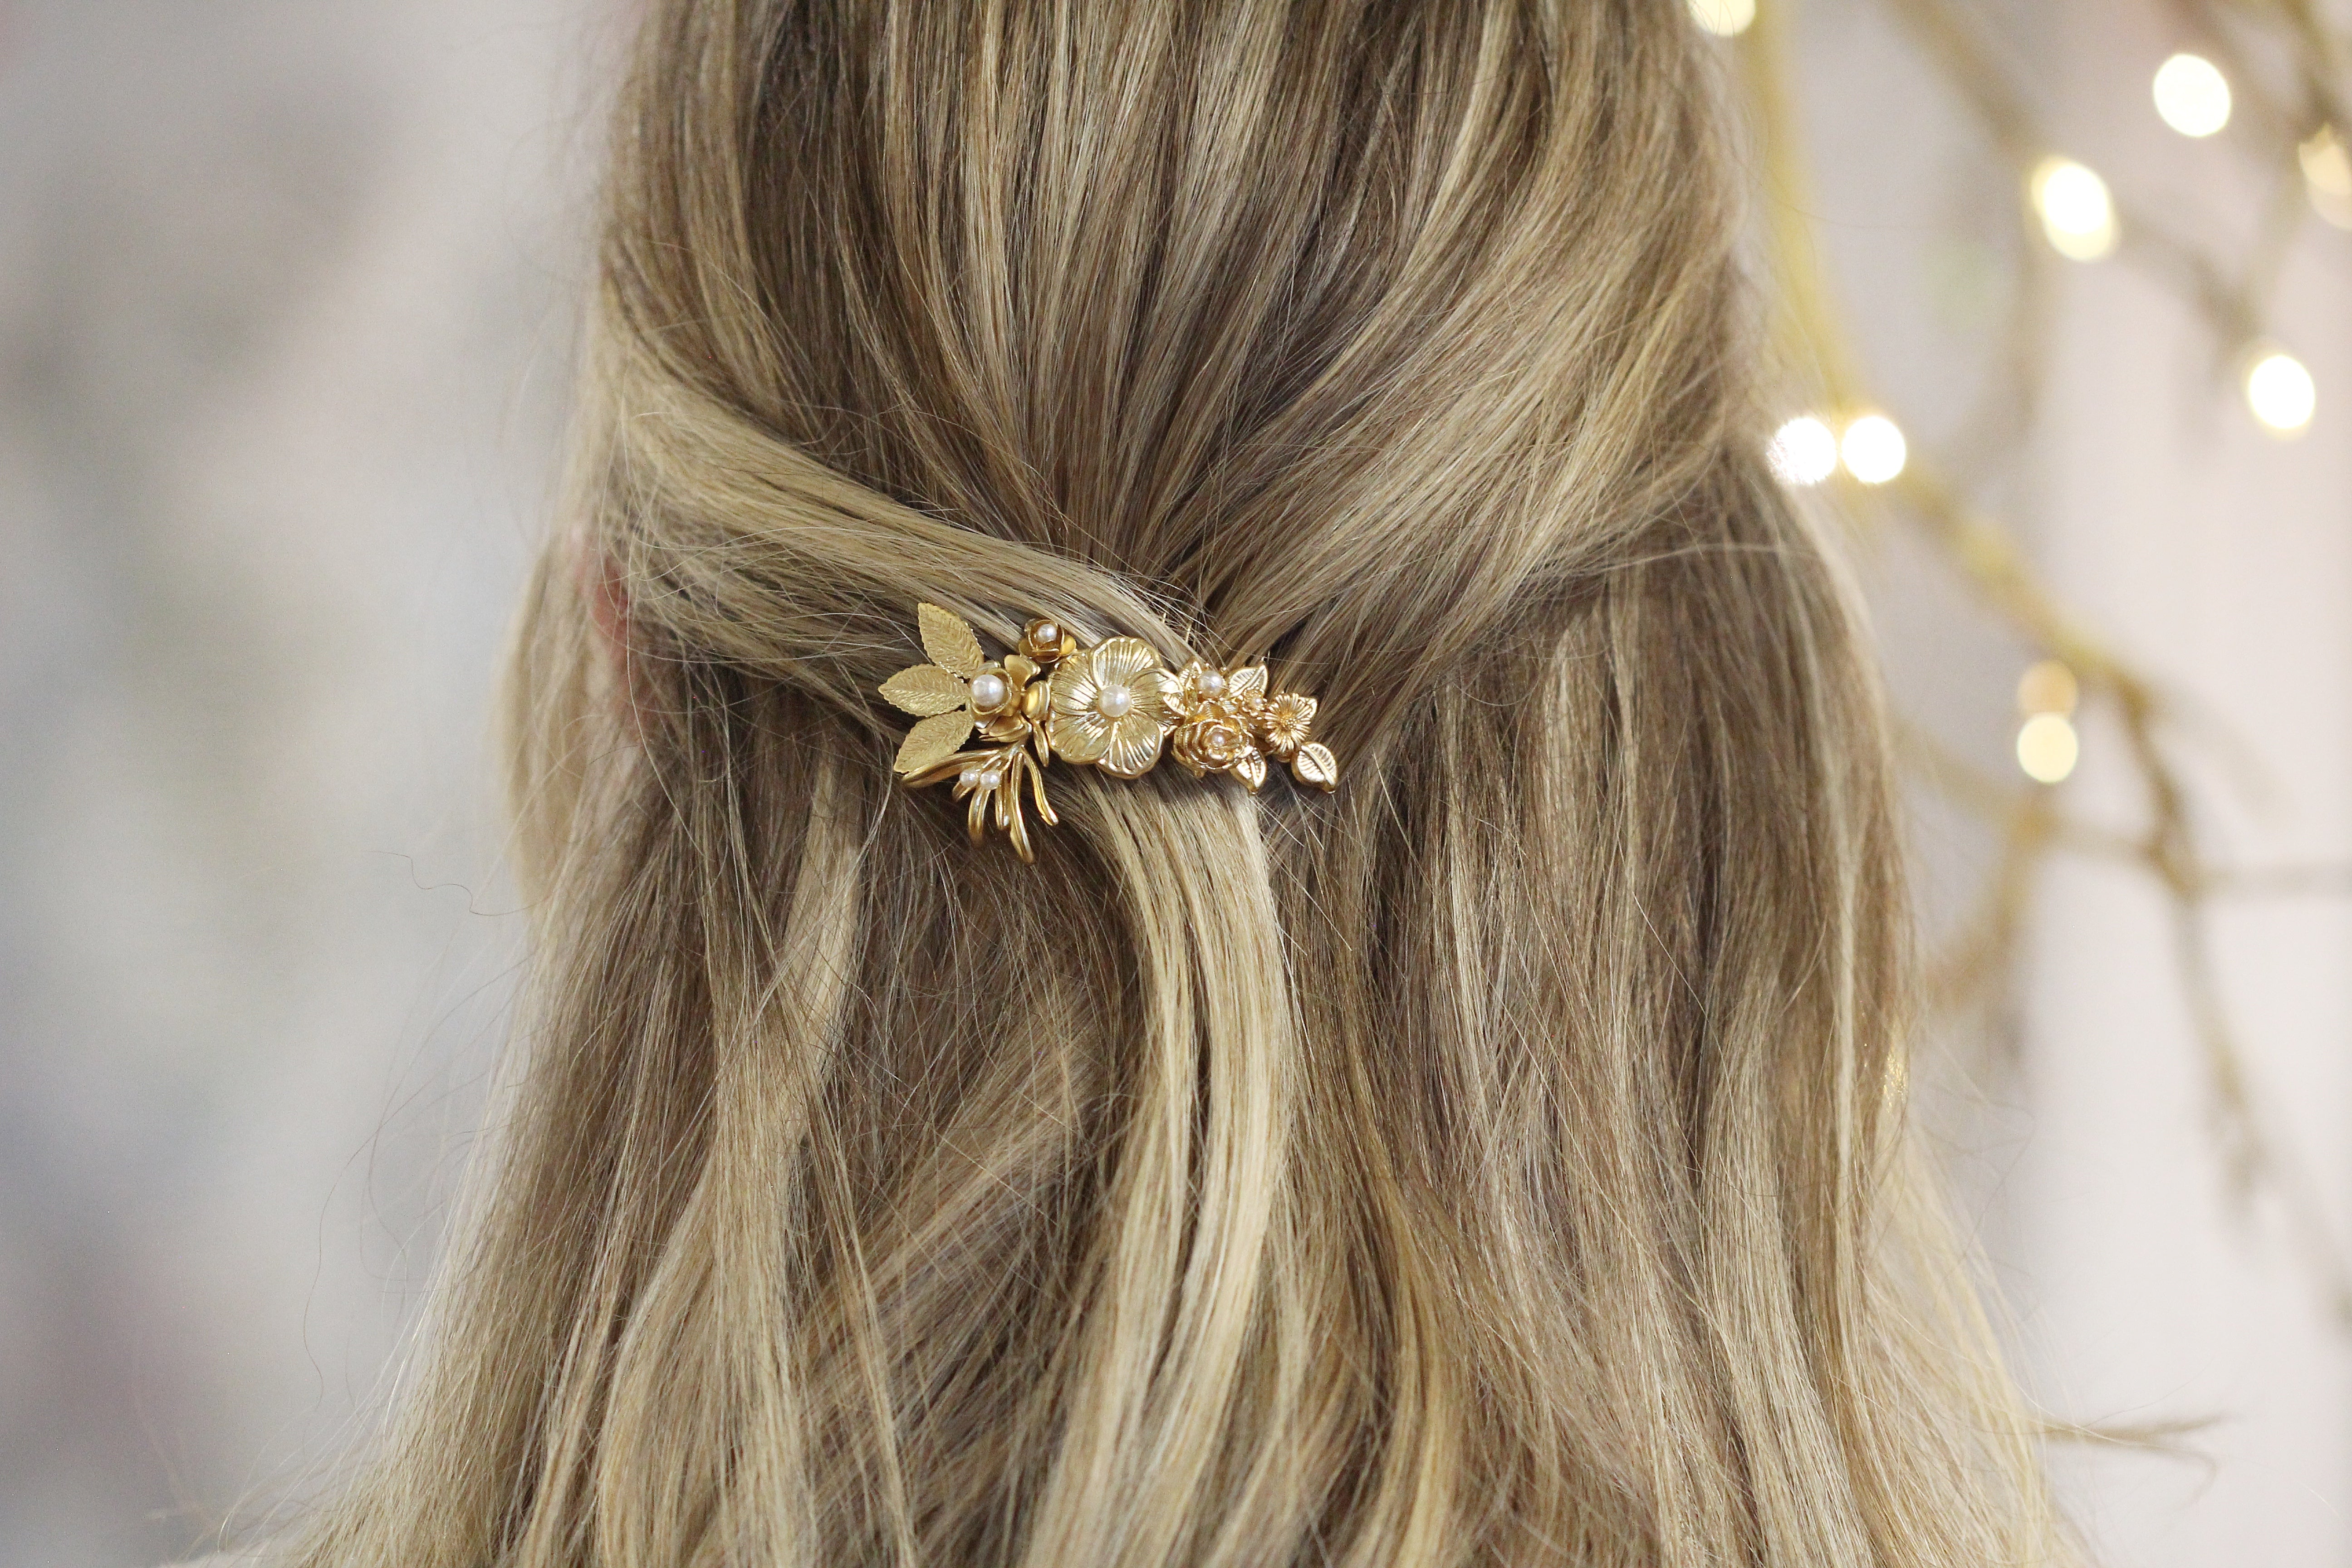 Field of Roses Hair Comb